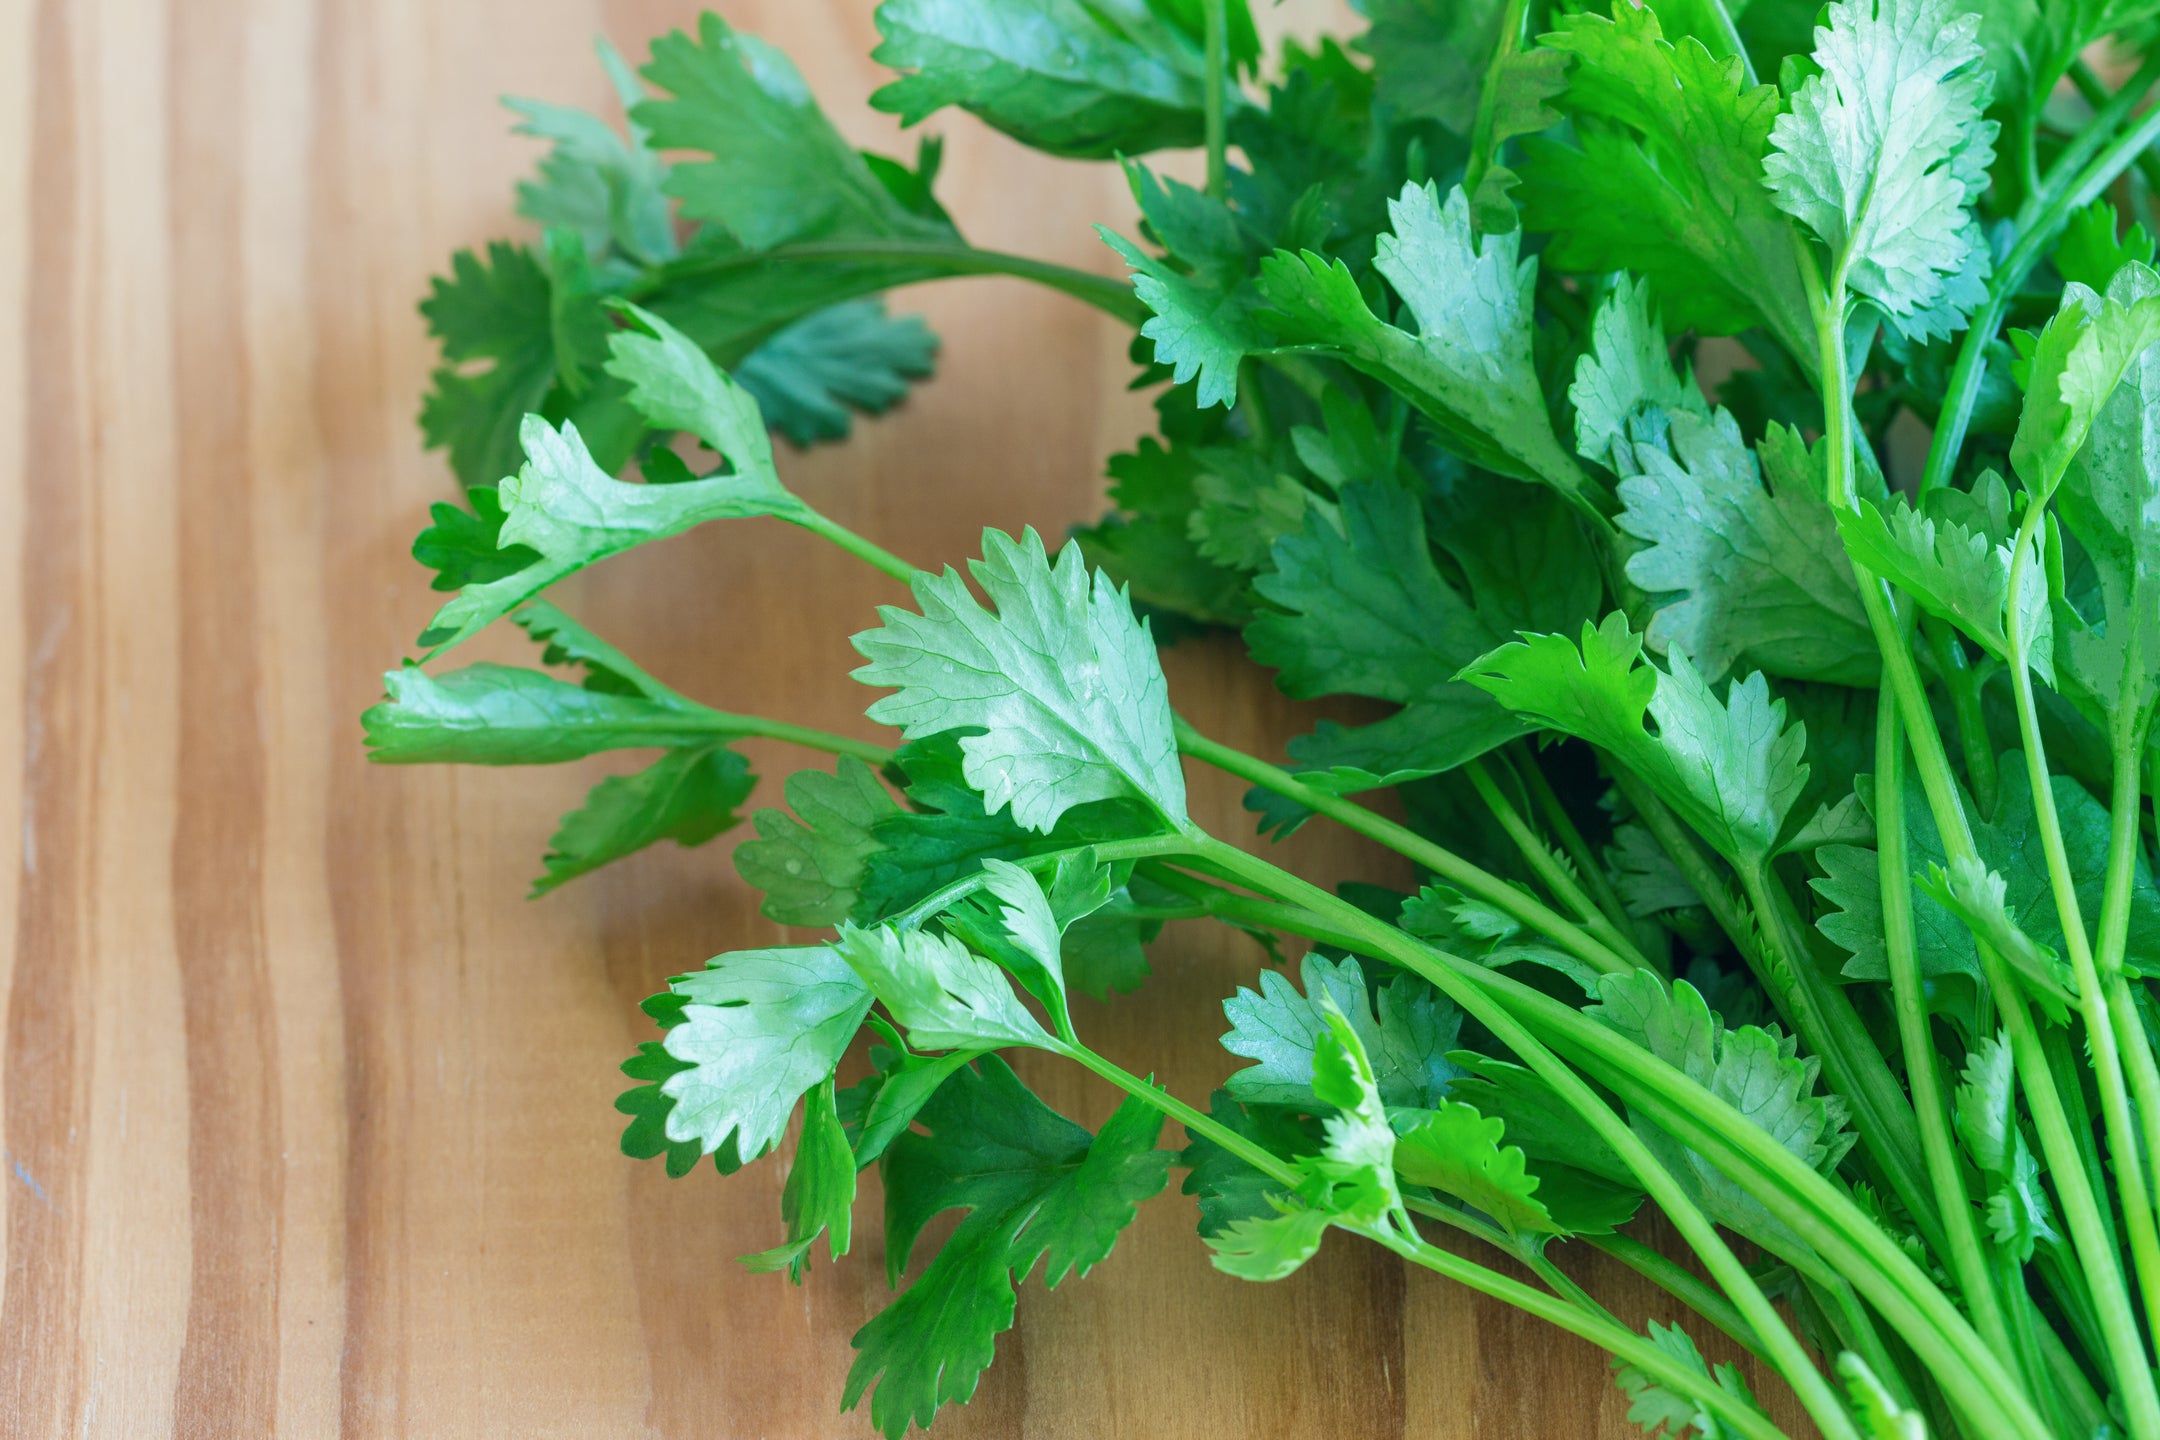 Cilantro Tastes Like Soap To ⅓ of the Population. Here’s Why.